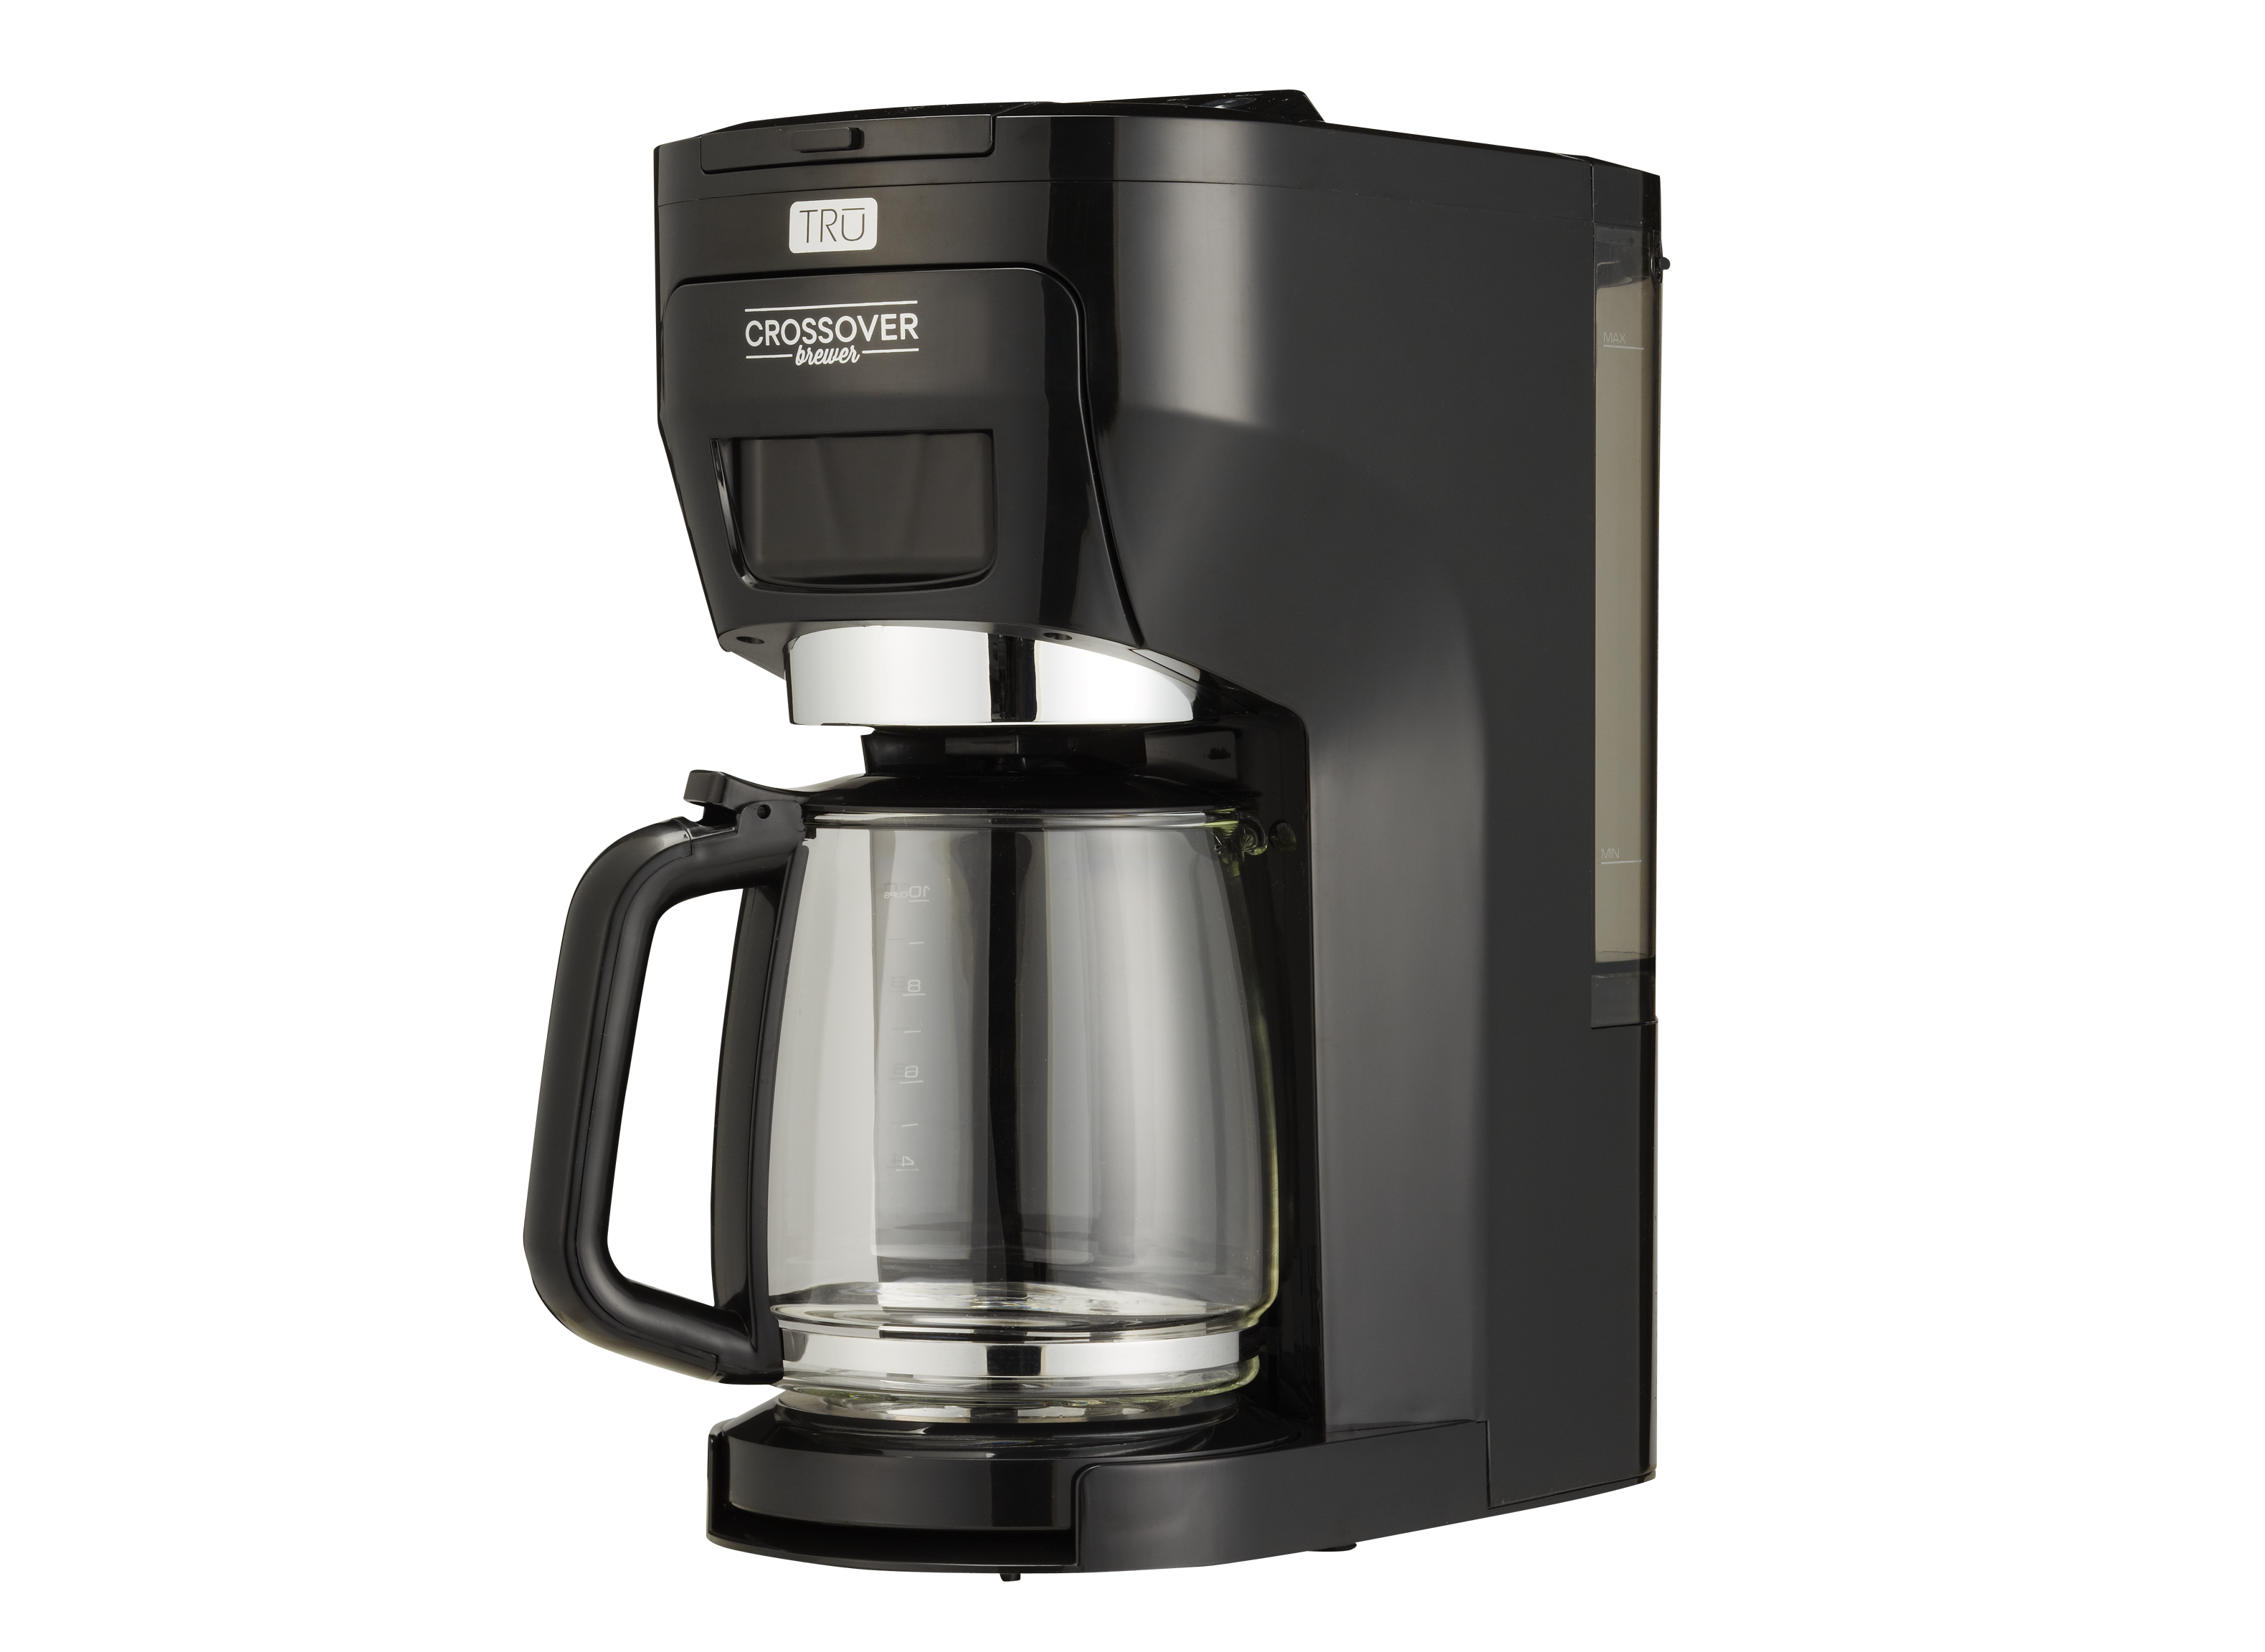 https://crdms.images.consumerreports.org/prod/products/cr/models/281975-coffeemakers-tru-crossoverbrewercm2000.png